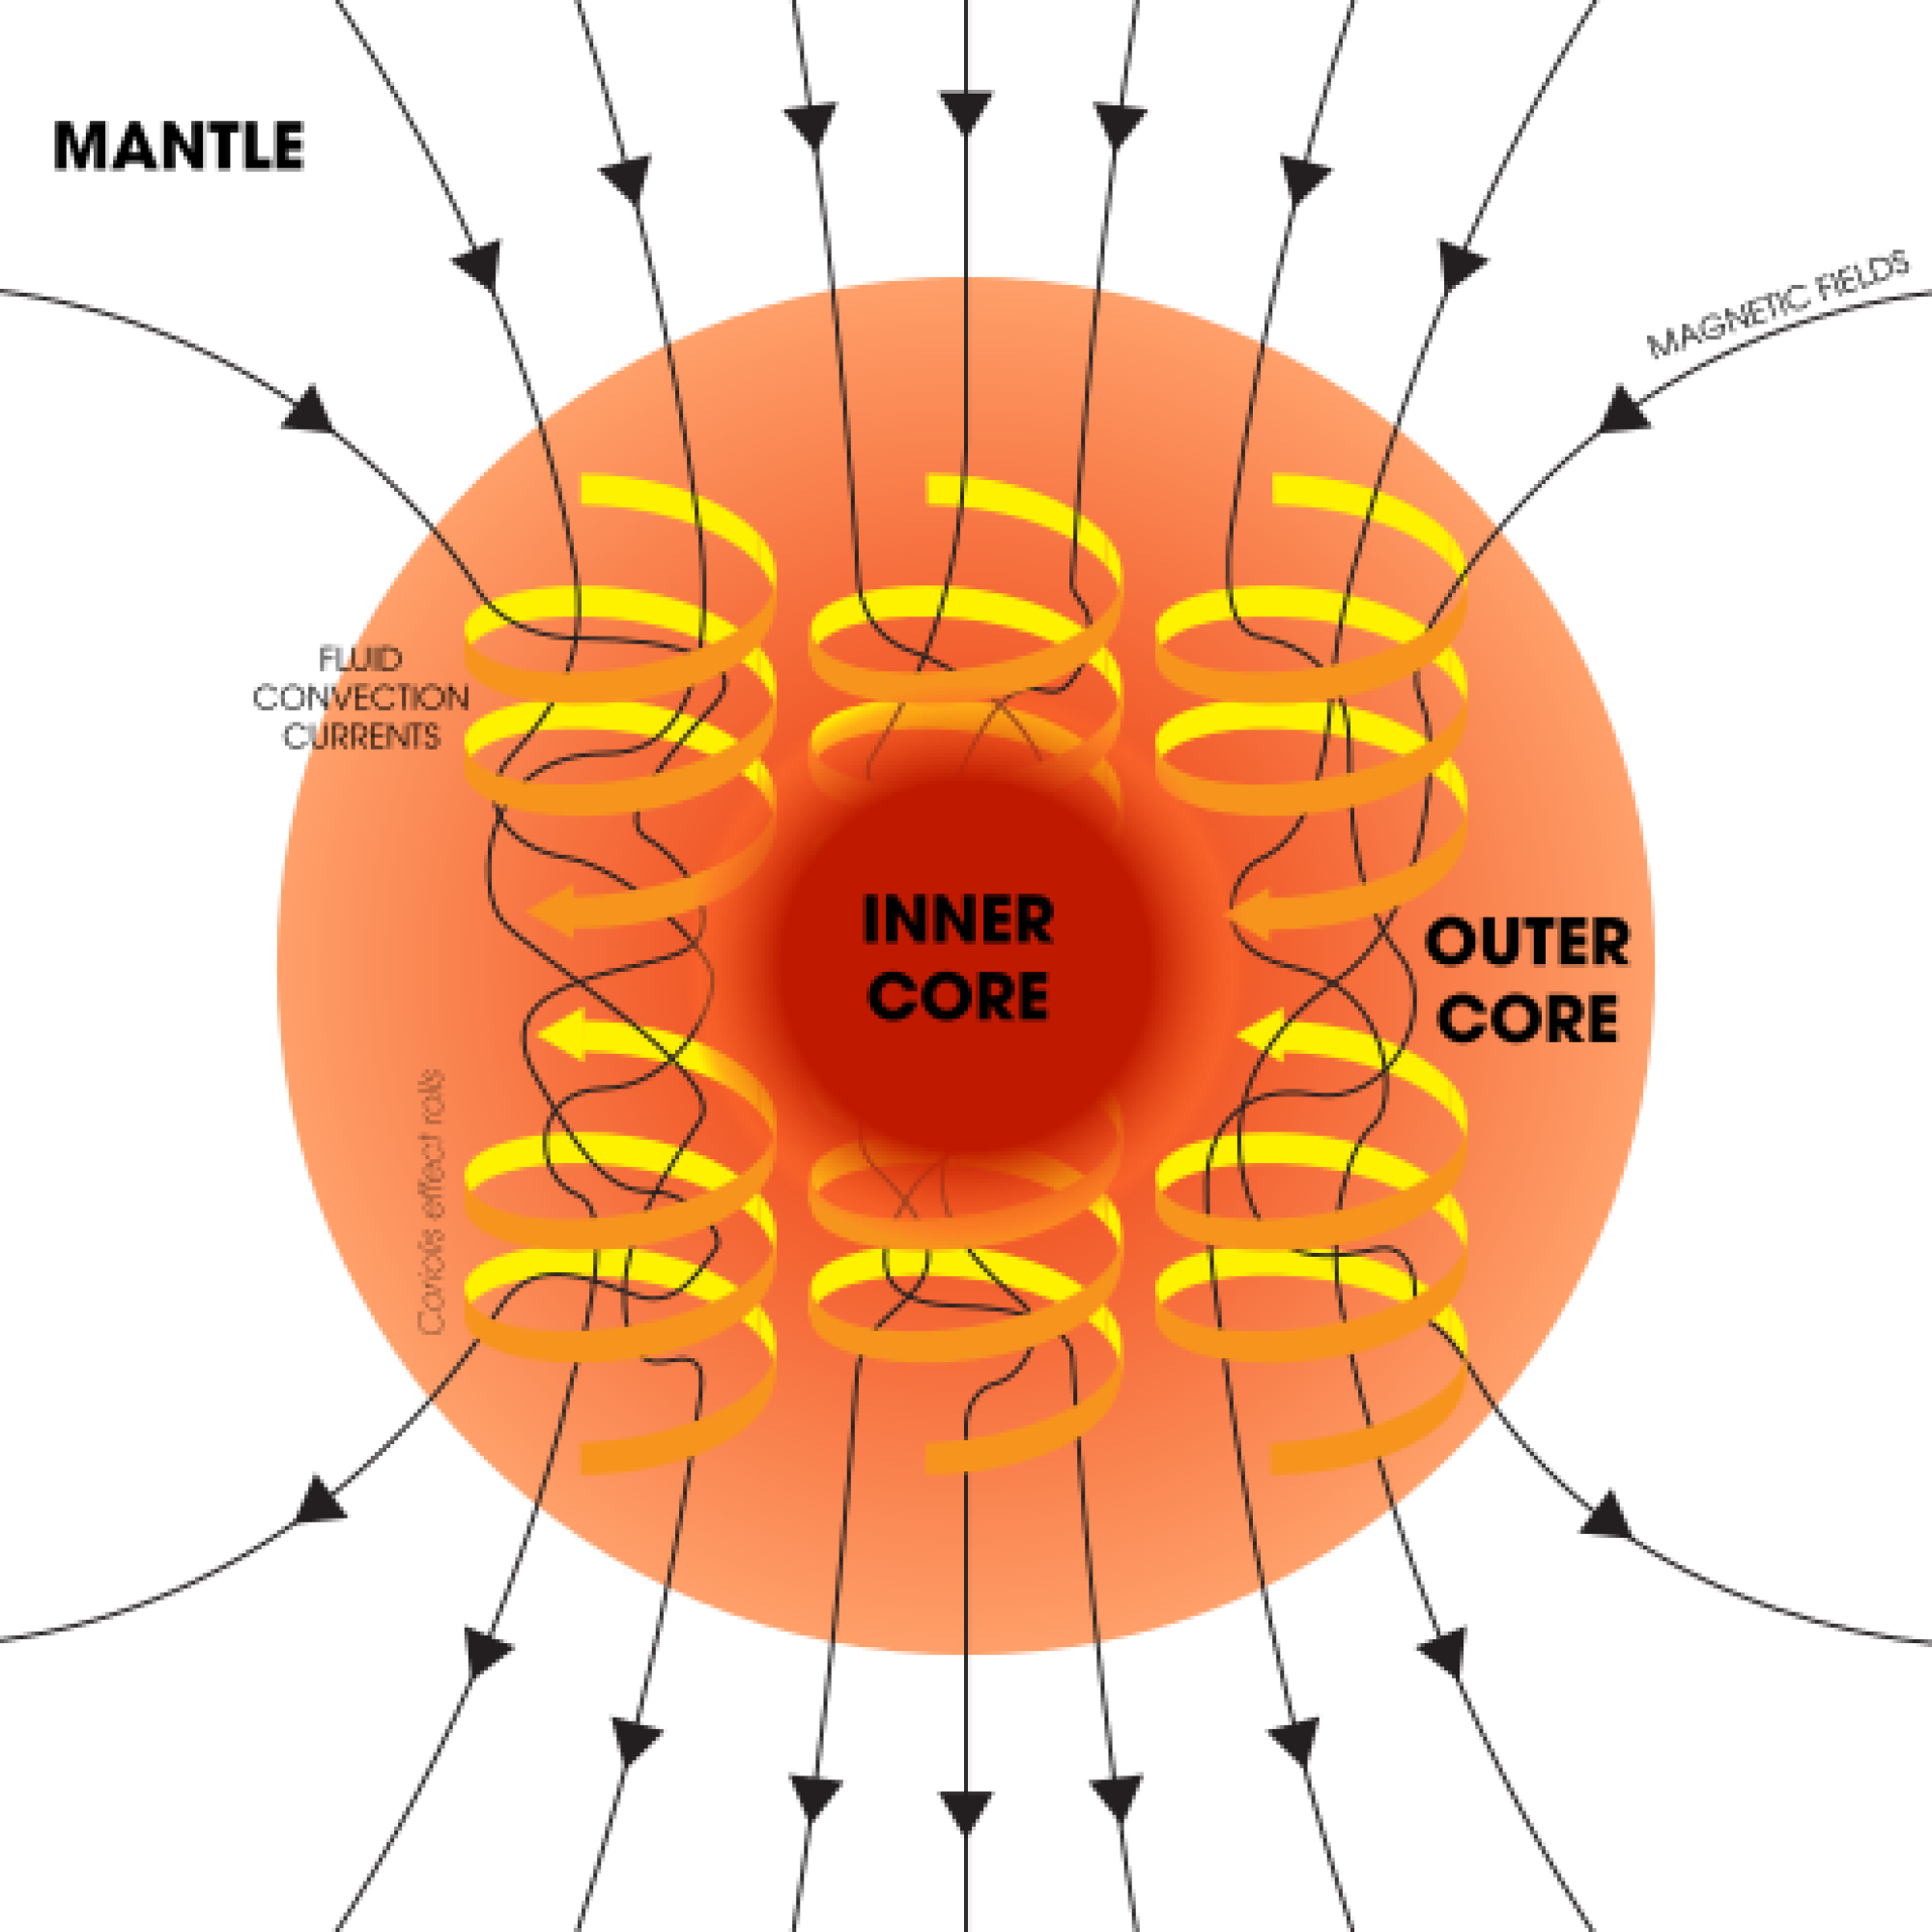 electric currents created in the outer core that produce Earth